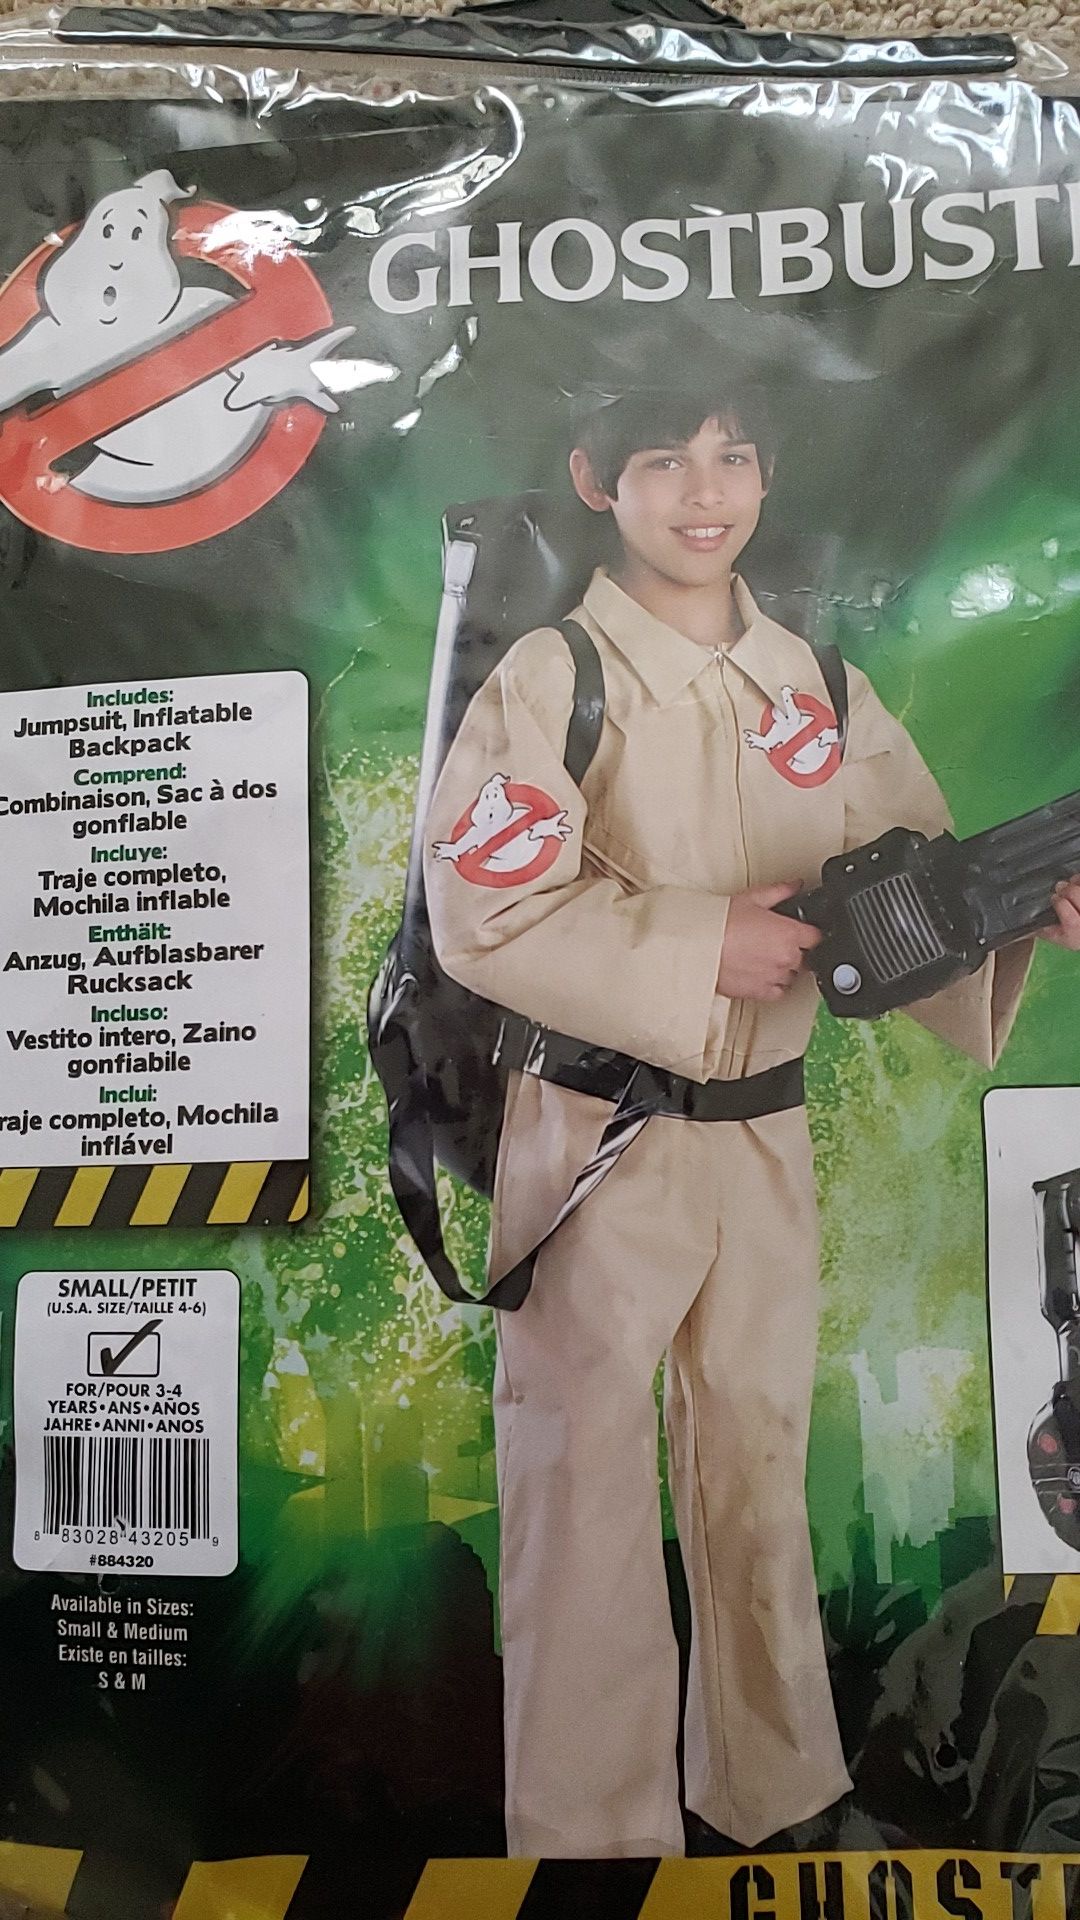 Kids Ghost buster costume